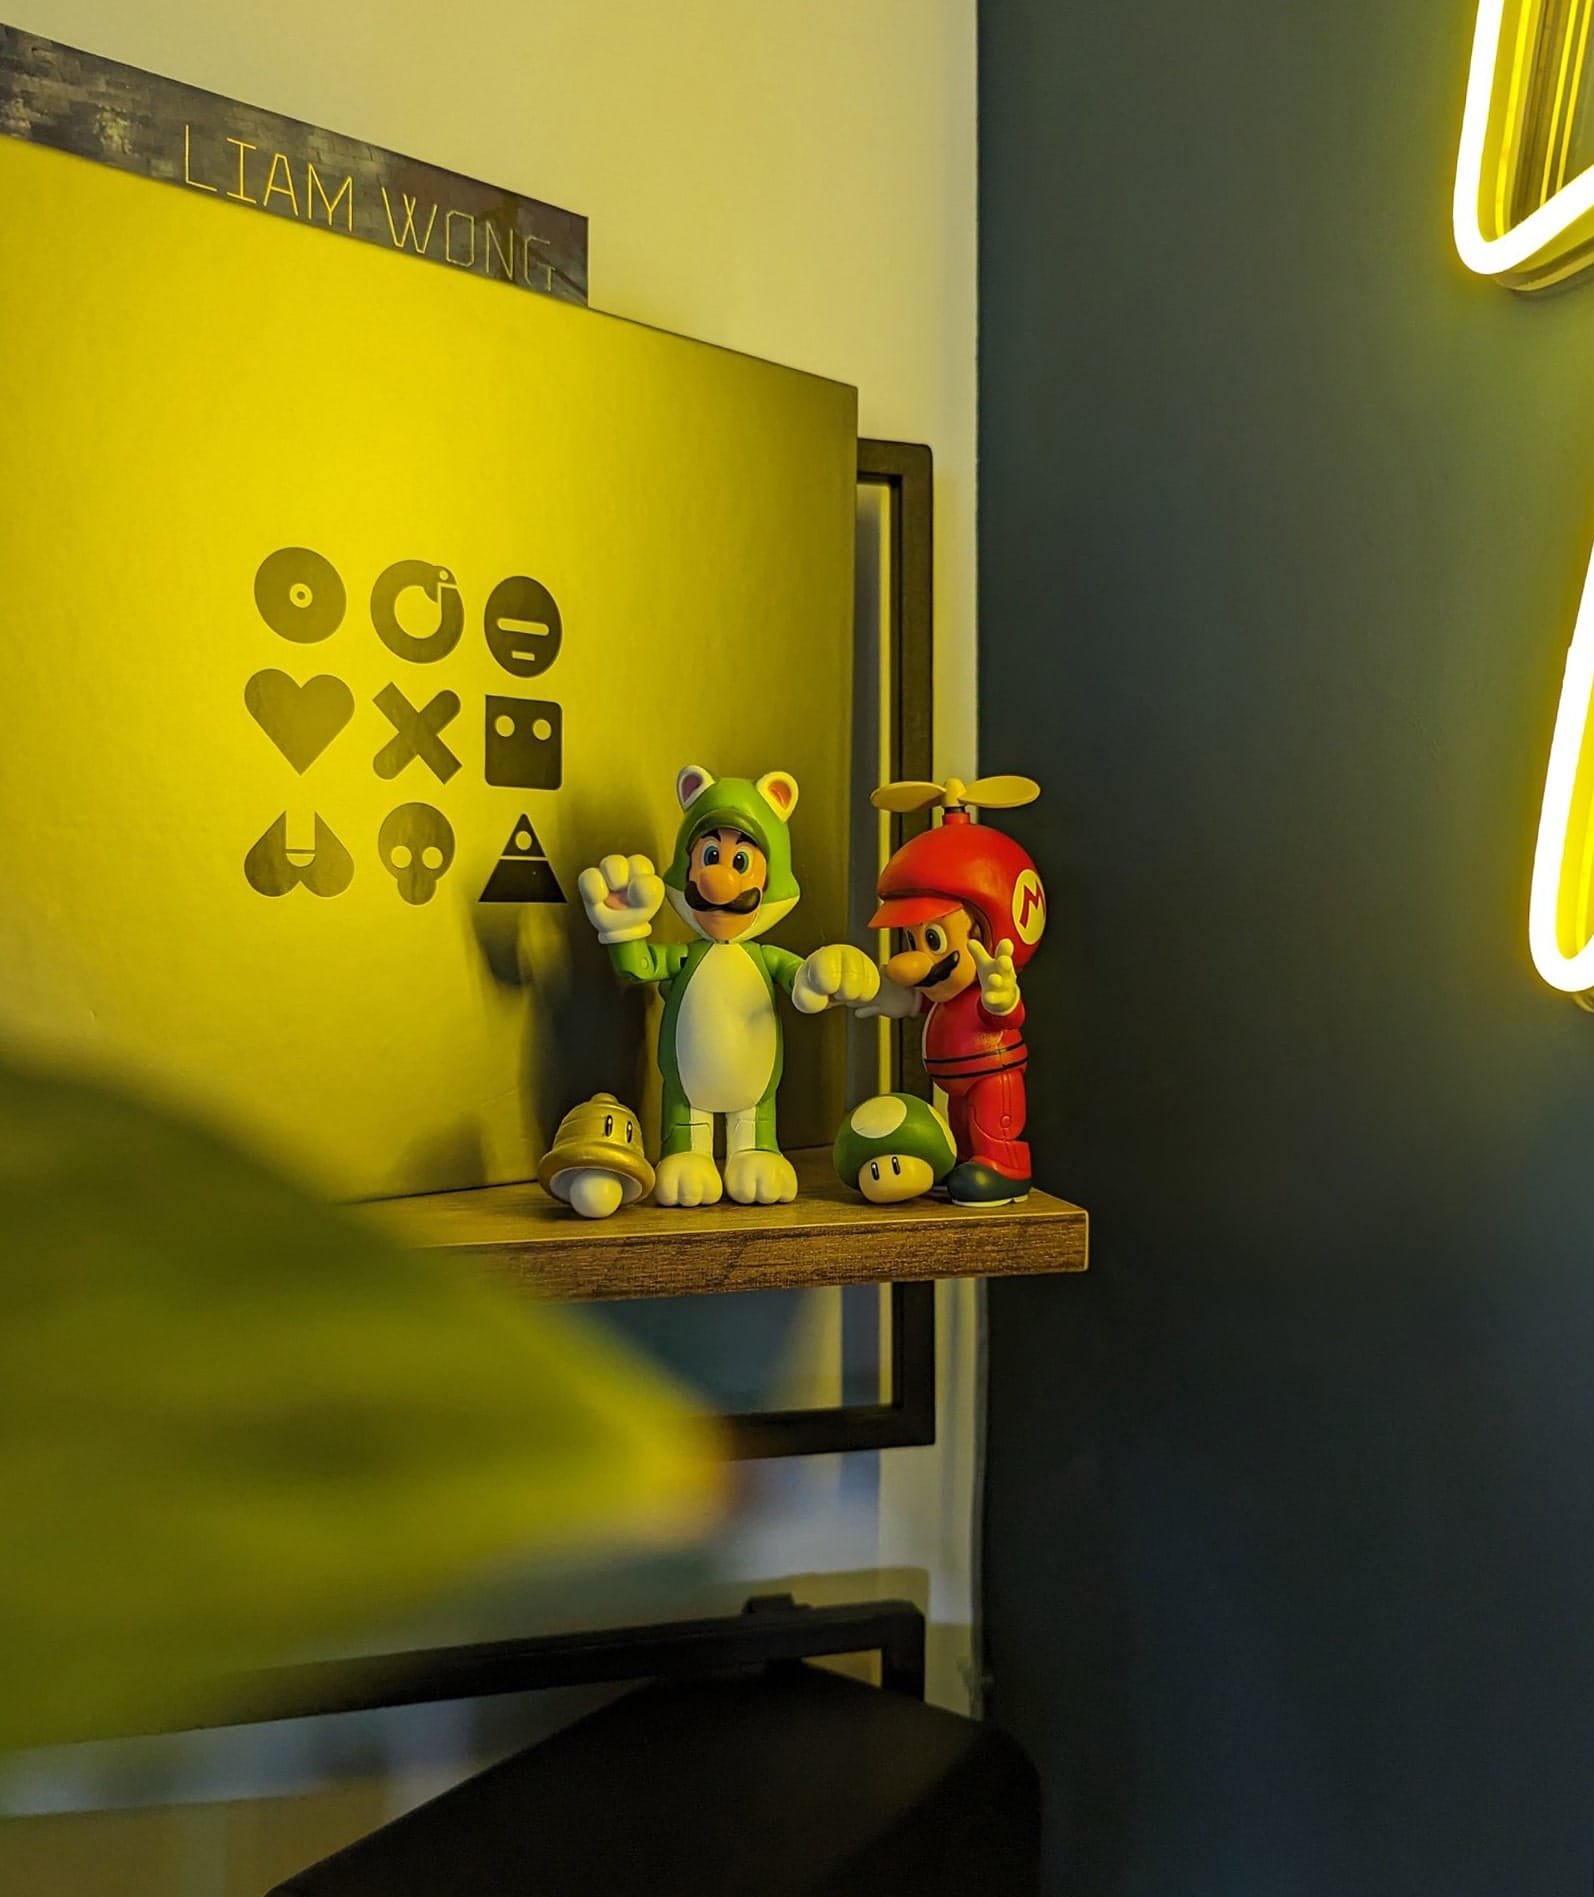 A shelf displaying Luigi and Mario action figures in special costumes from the Super Mario series, set against a backdrop with a glowing yellow light